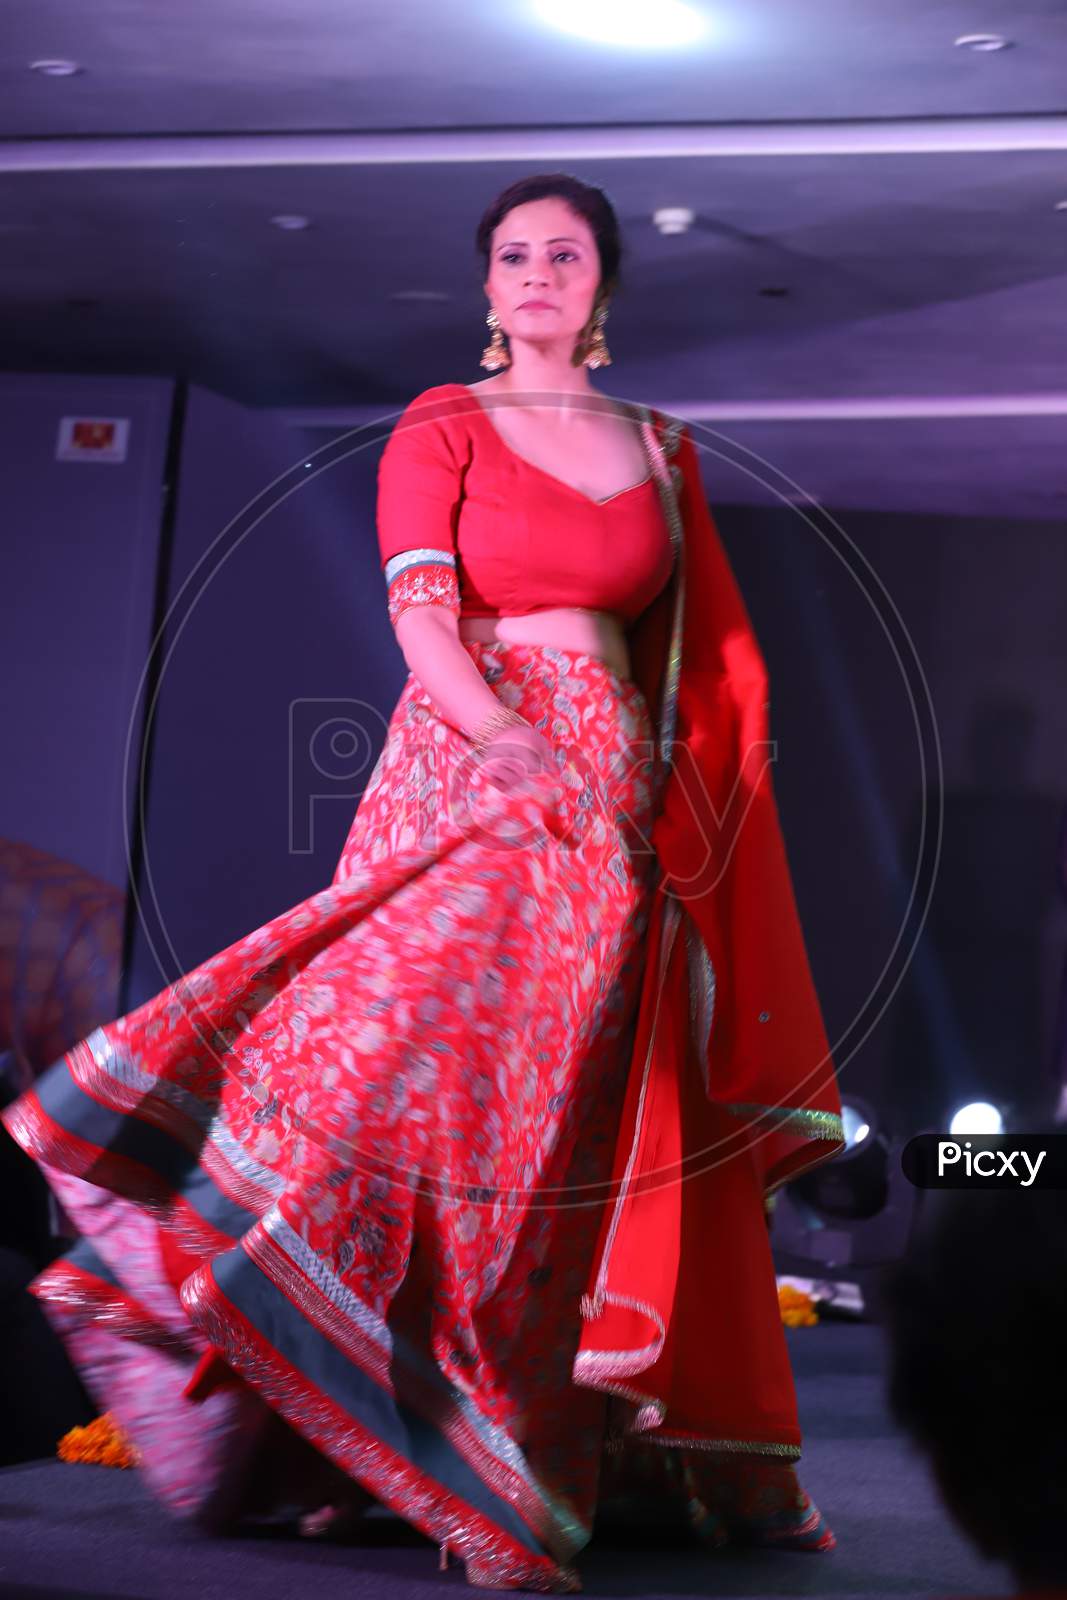 Image Of Indian Models Posing On Ramp Walk In An Fashion Show Ru279732 Picxy Learn to pose like a. https www picxy com photo 437782